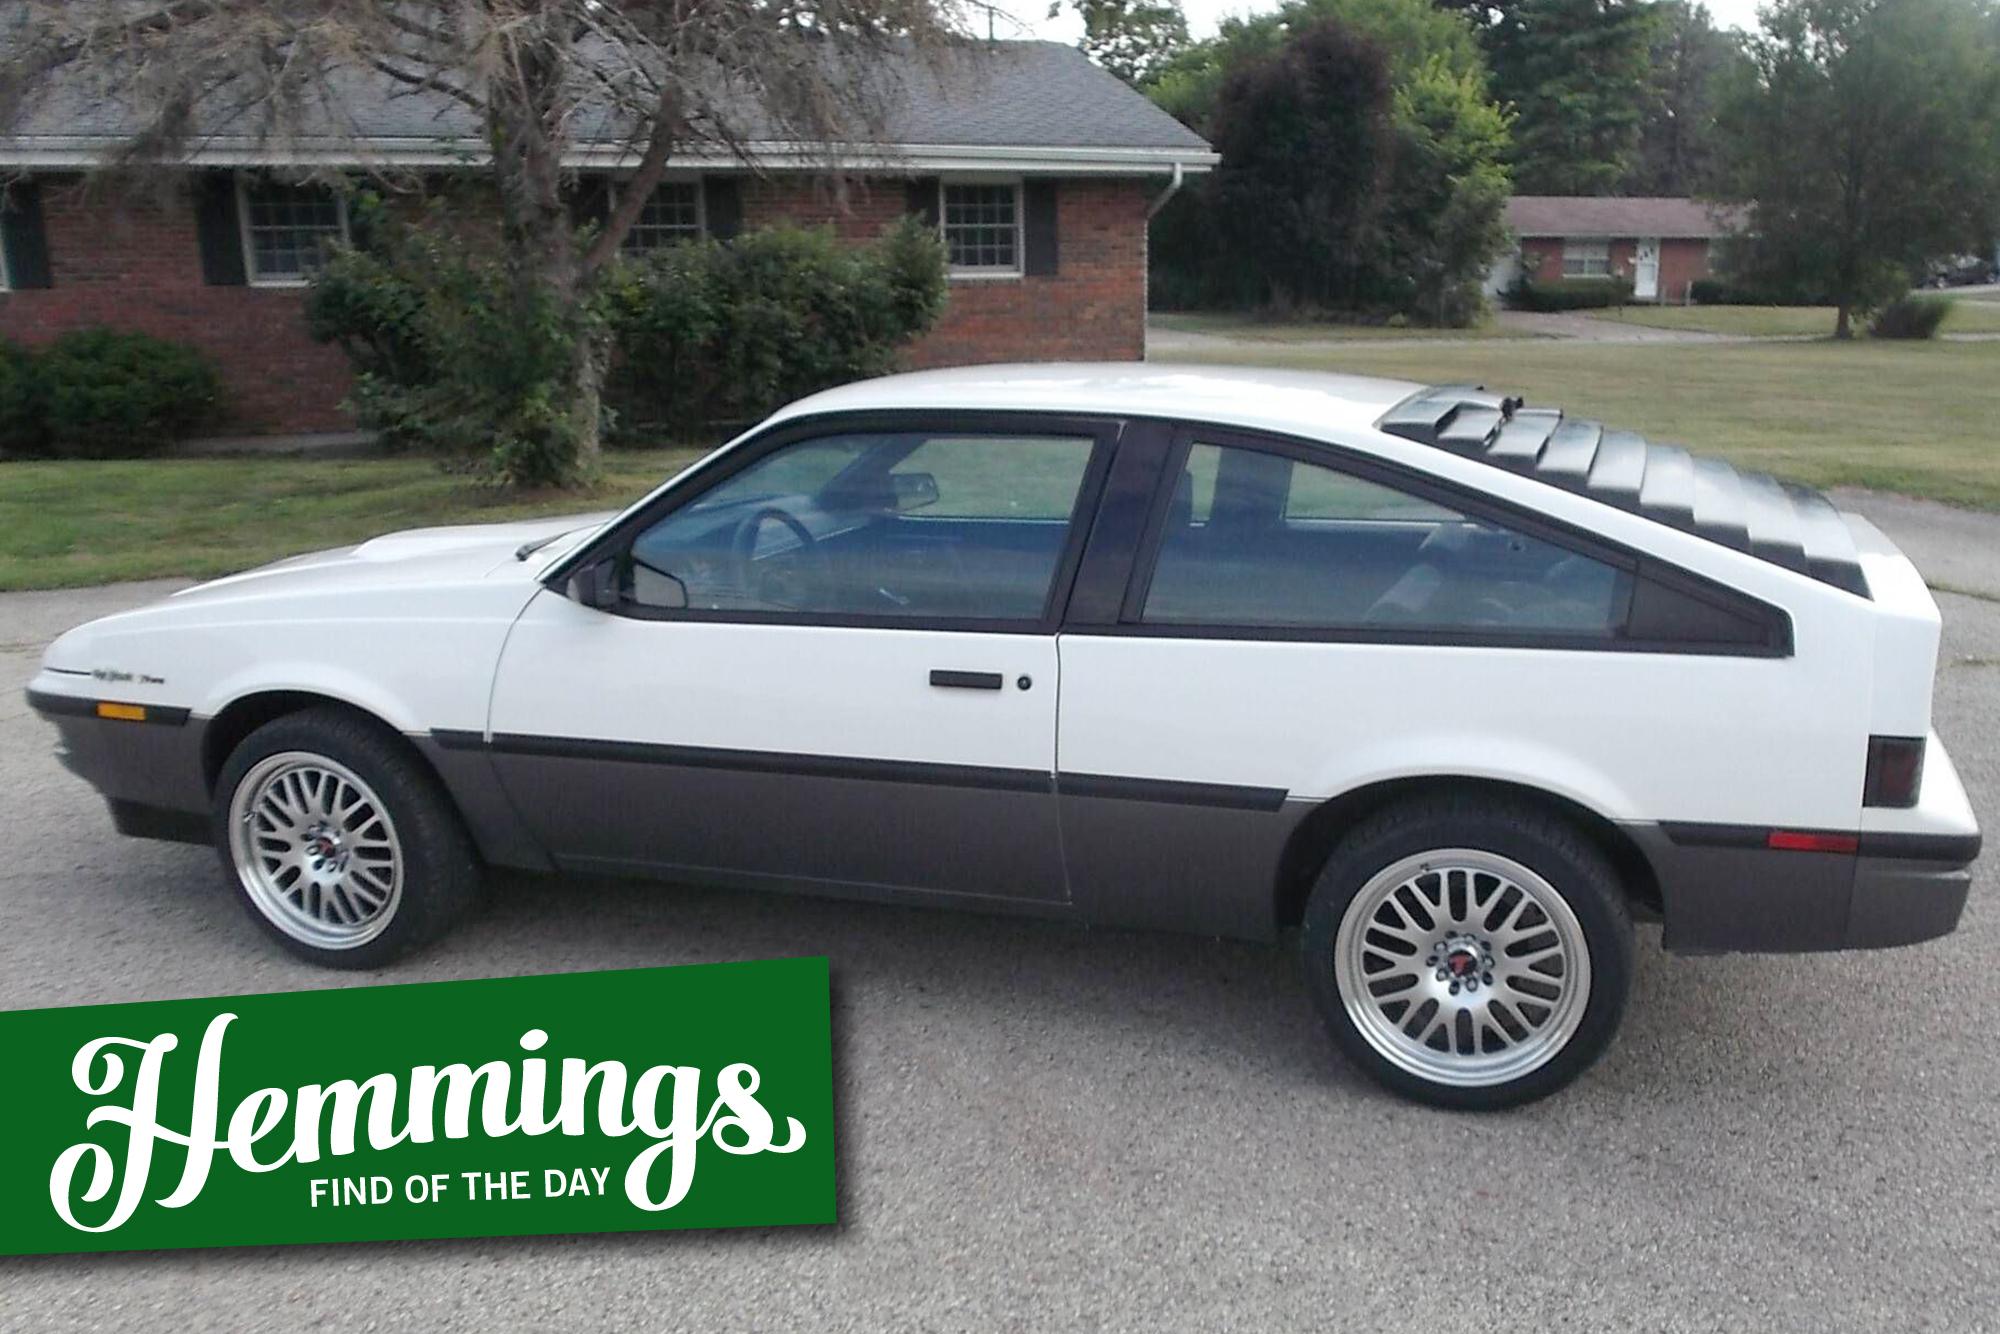 No, we haven't see a 1986 Buick Skyhawk T-Type in quite some time either